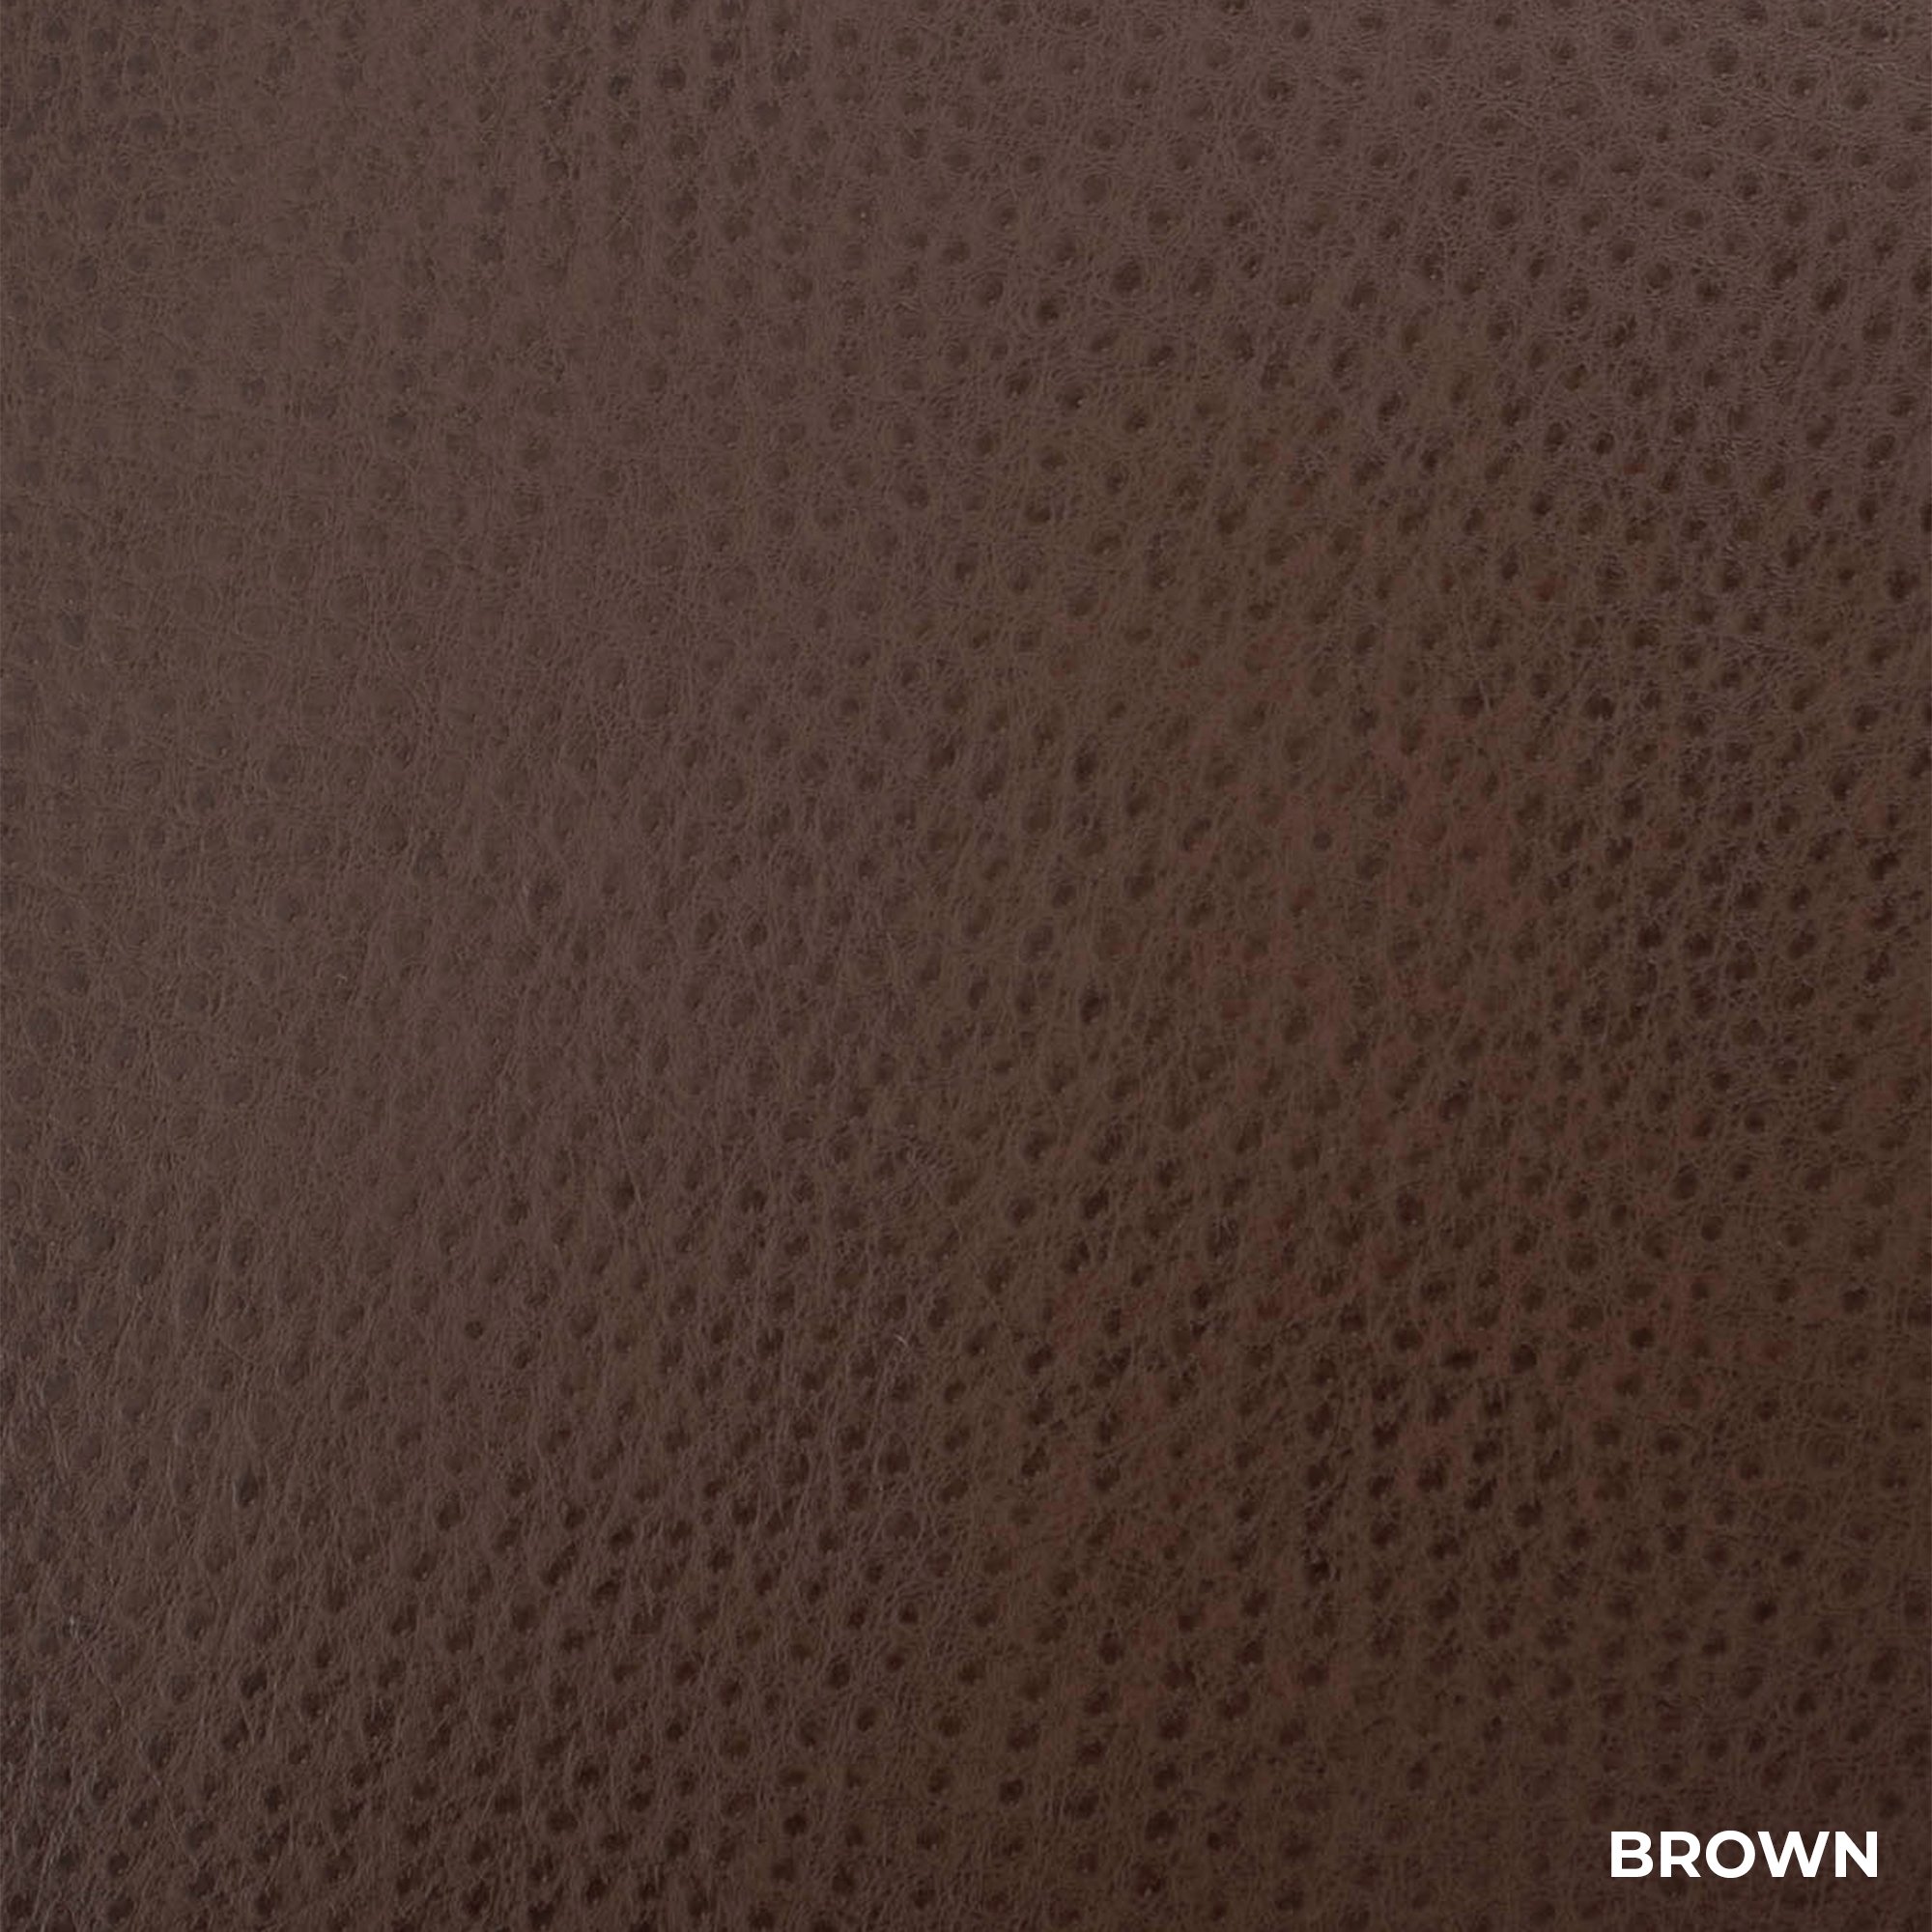 Chesterfield Brown.